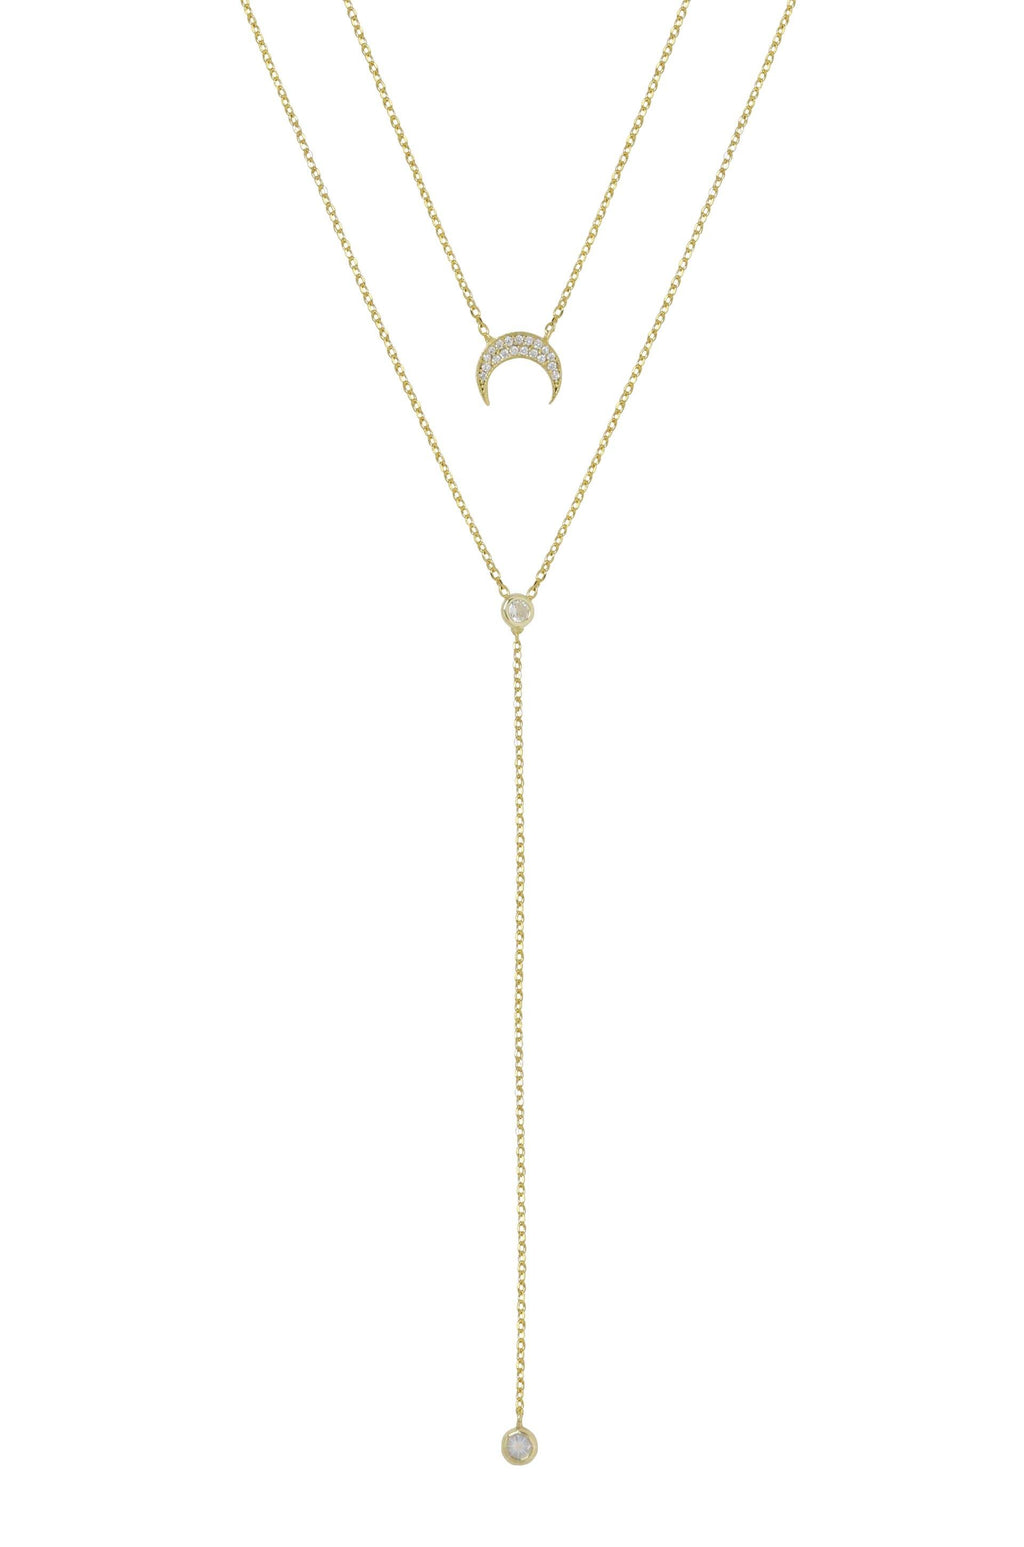 Dainty Layered Crescent Moon 18k Gold Plated Necklace Set - The Gallant Way